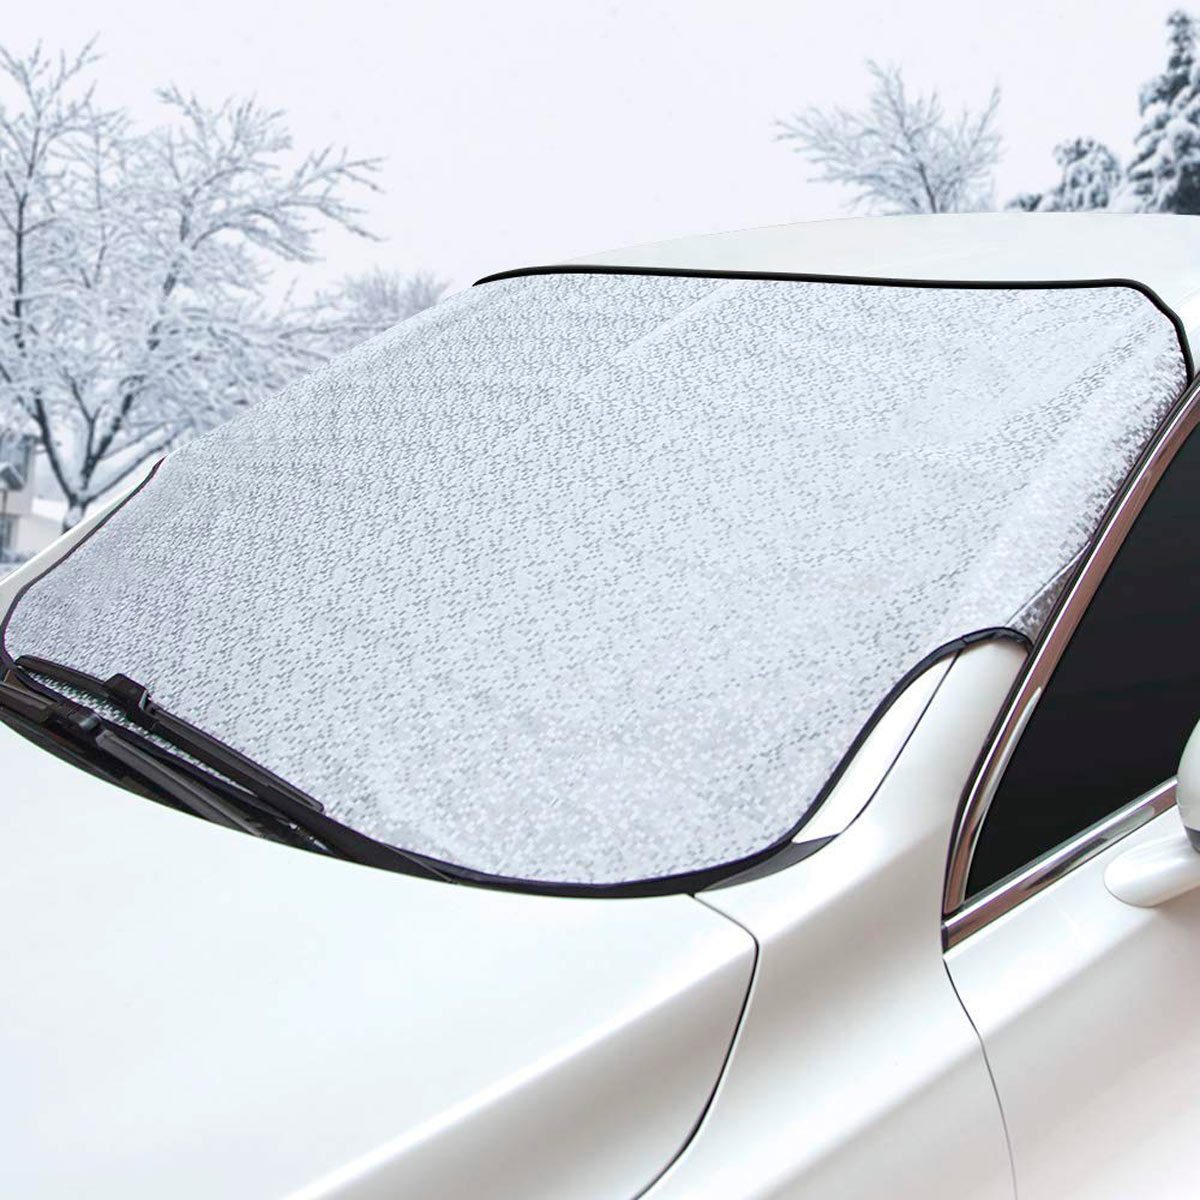 How to Never Scrape Your Windshield Again | Family Handyman